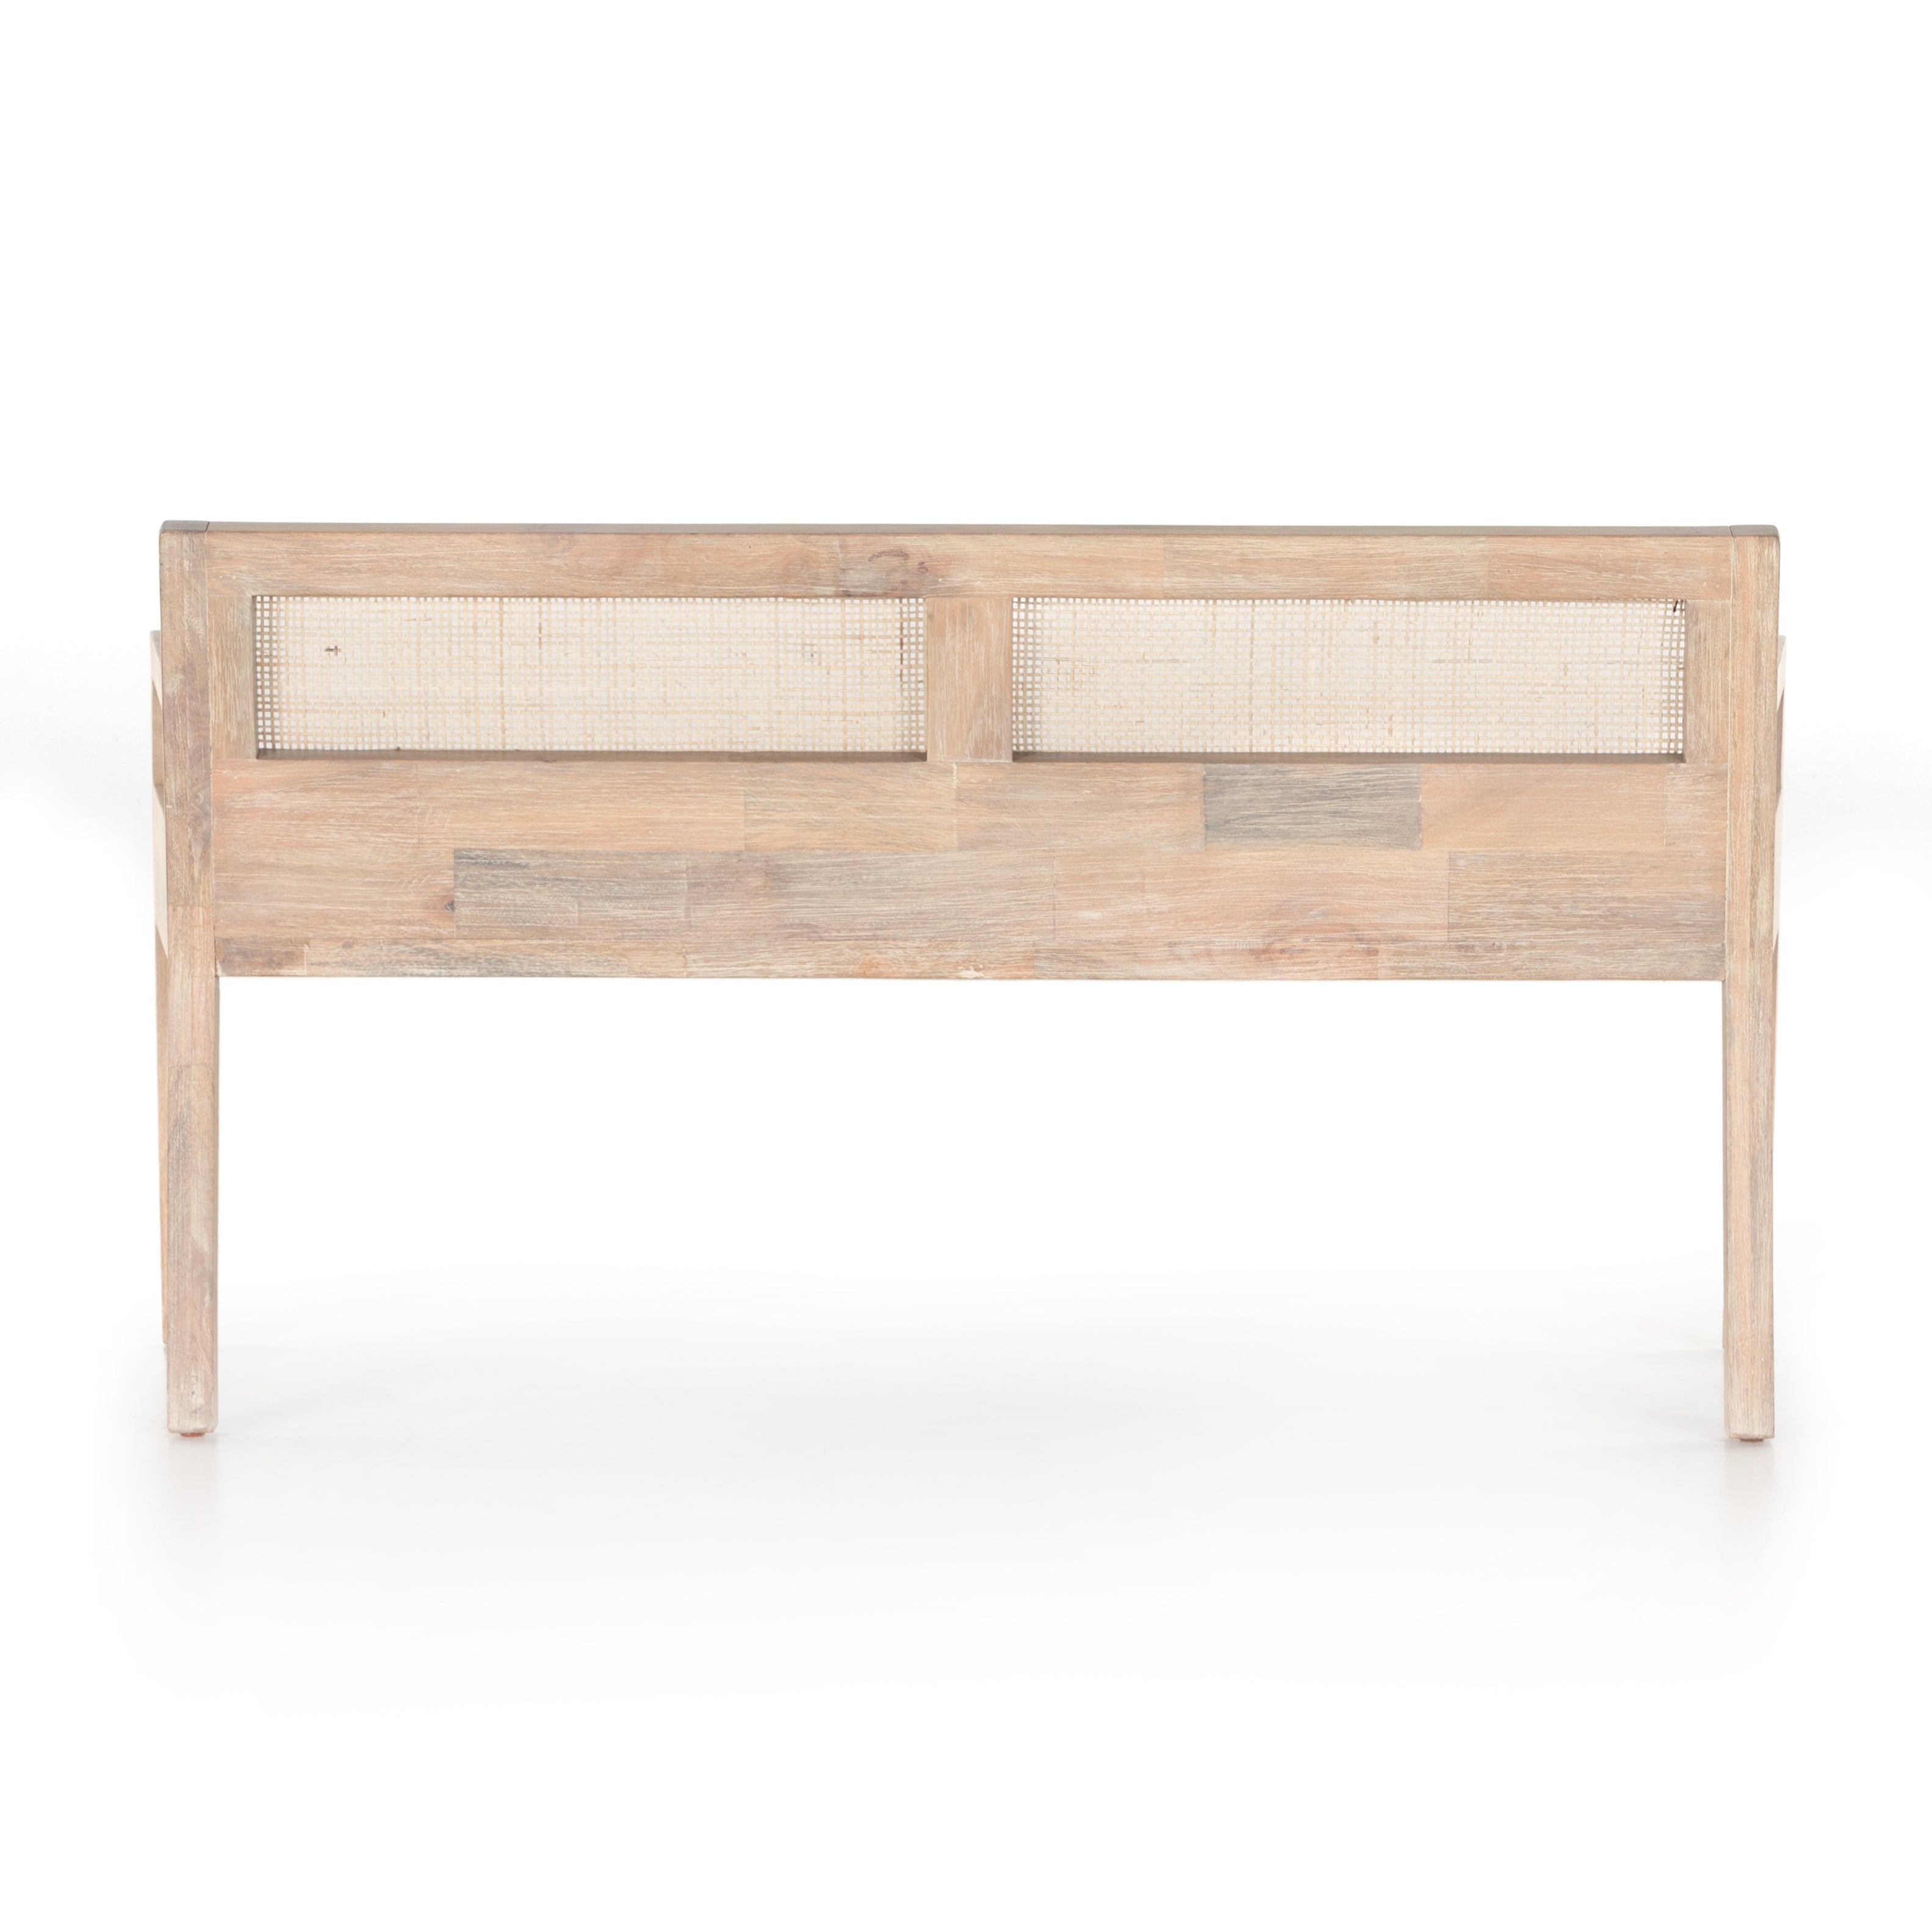 We are swooning over the mid-century inspired Clarita Accent Bench - White Wash Mango with it's natural cane and gorgeous white wash mango frame. A perfect place to sit and drink your coffee or have some extra seating for your guests.   Overall Dimensions: 54.00"w x 19.75"d x 28.75"h